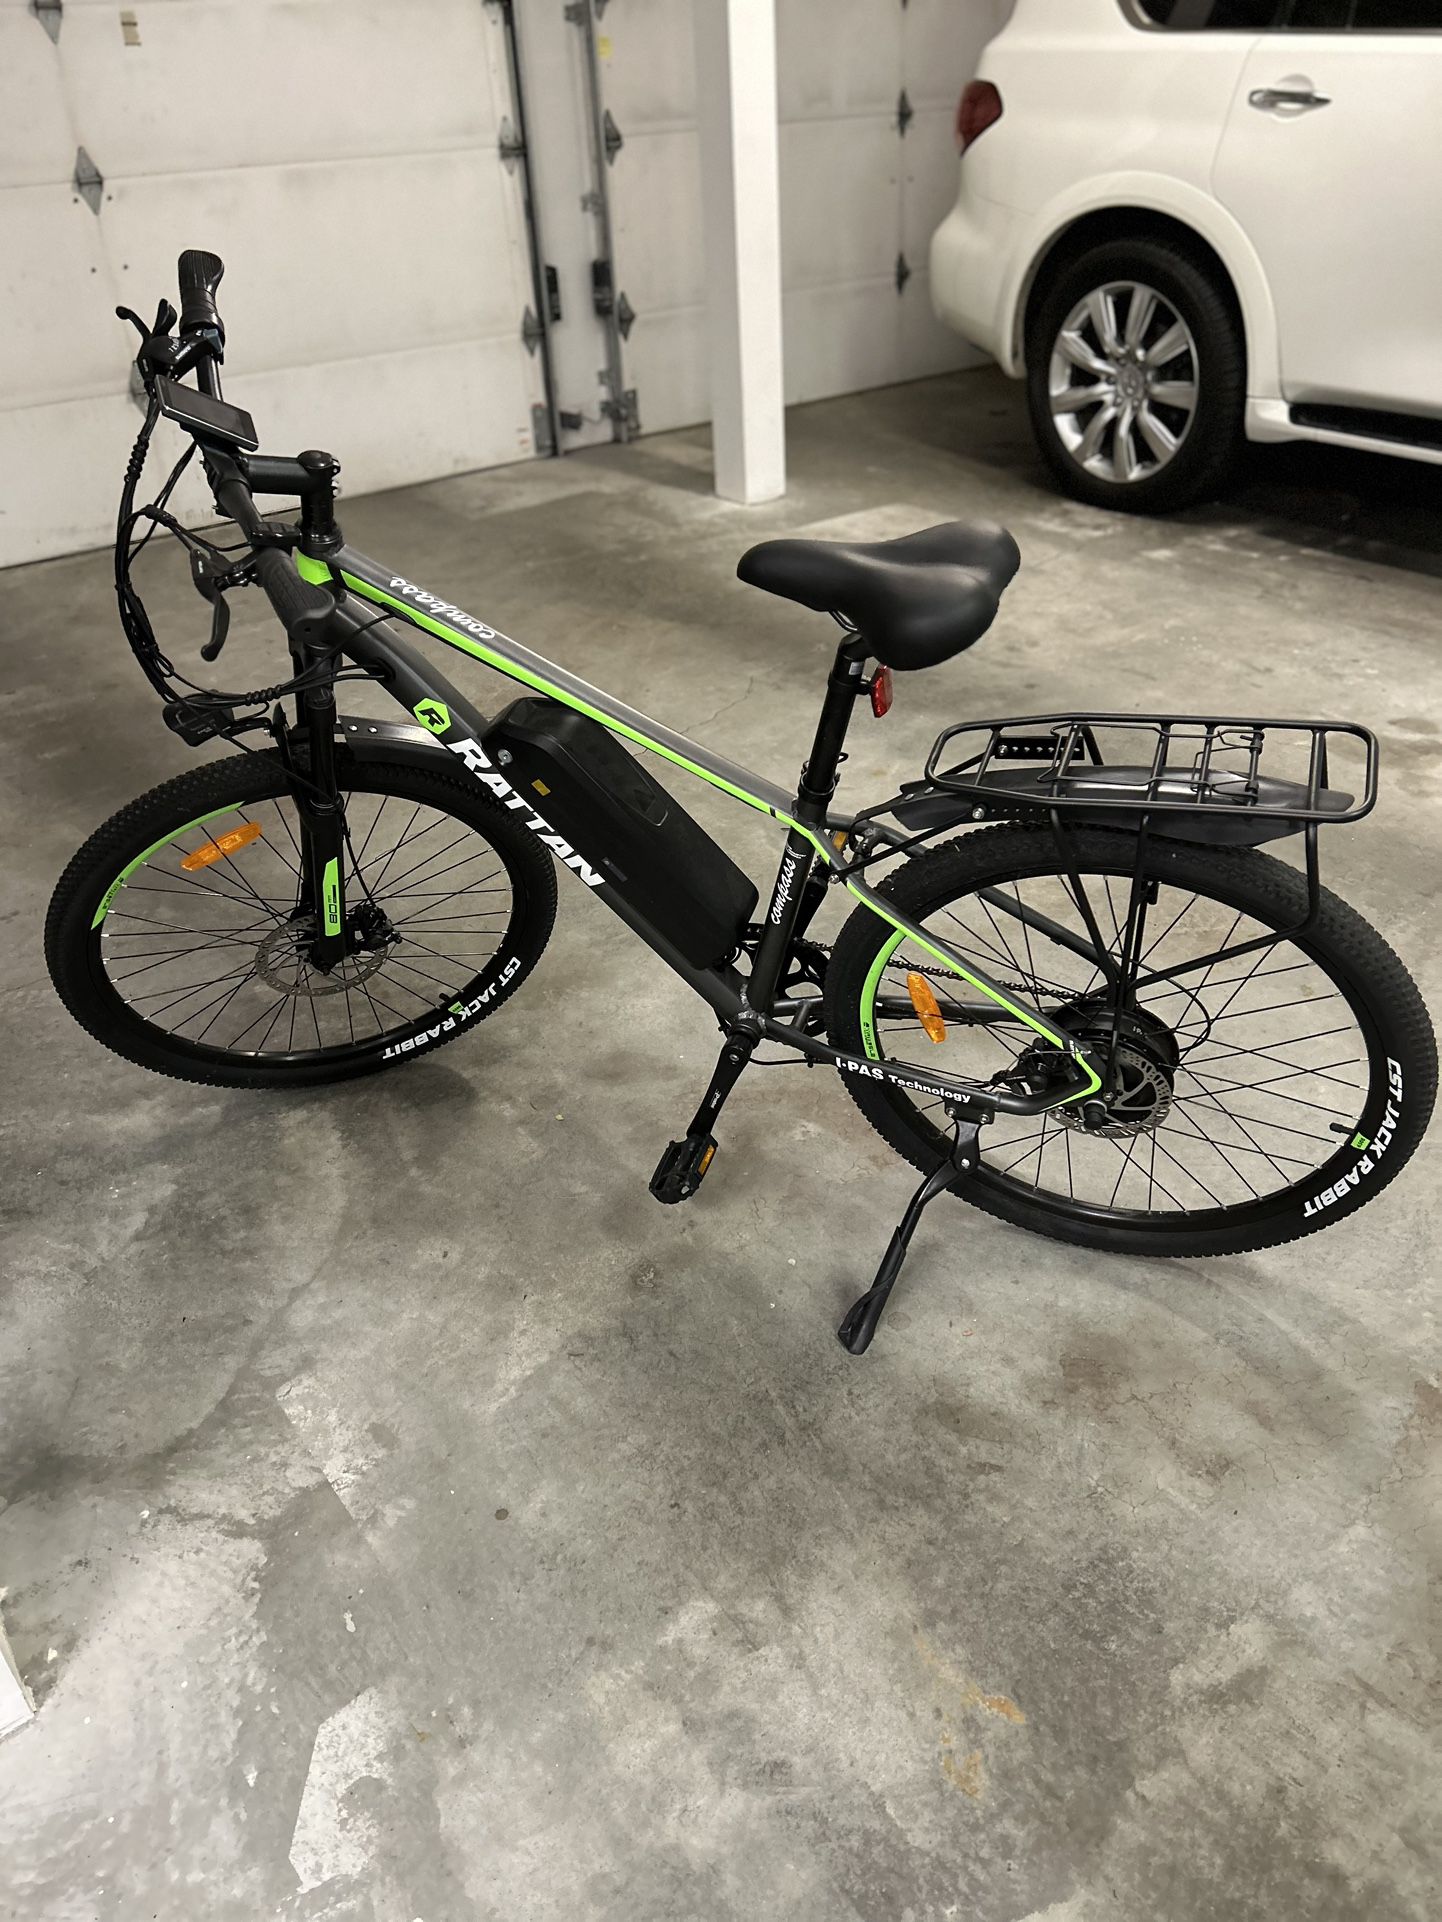 Asomtom E300 Electric Bicycle 